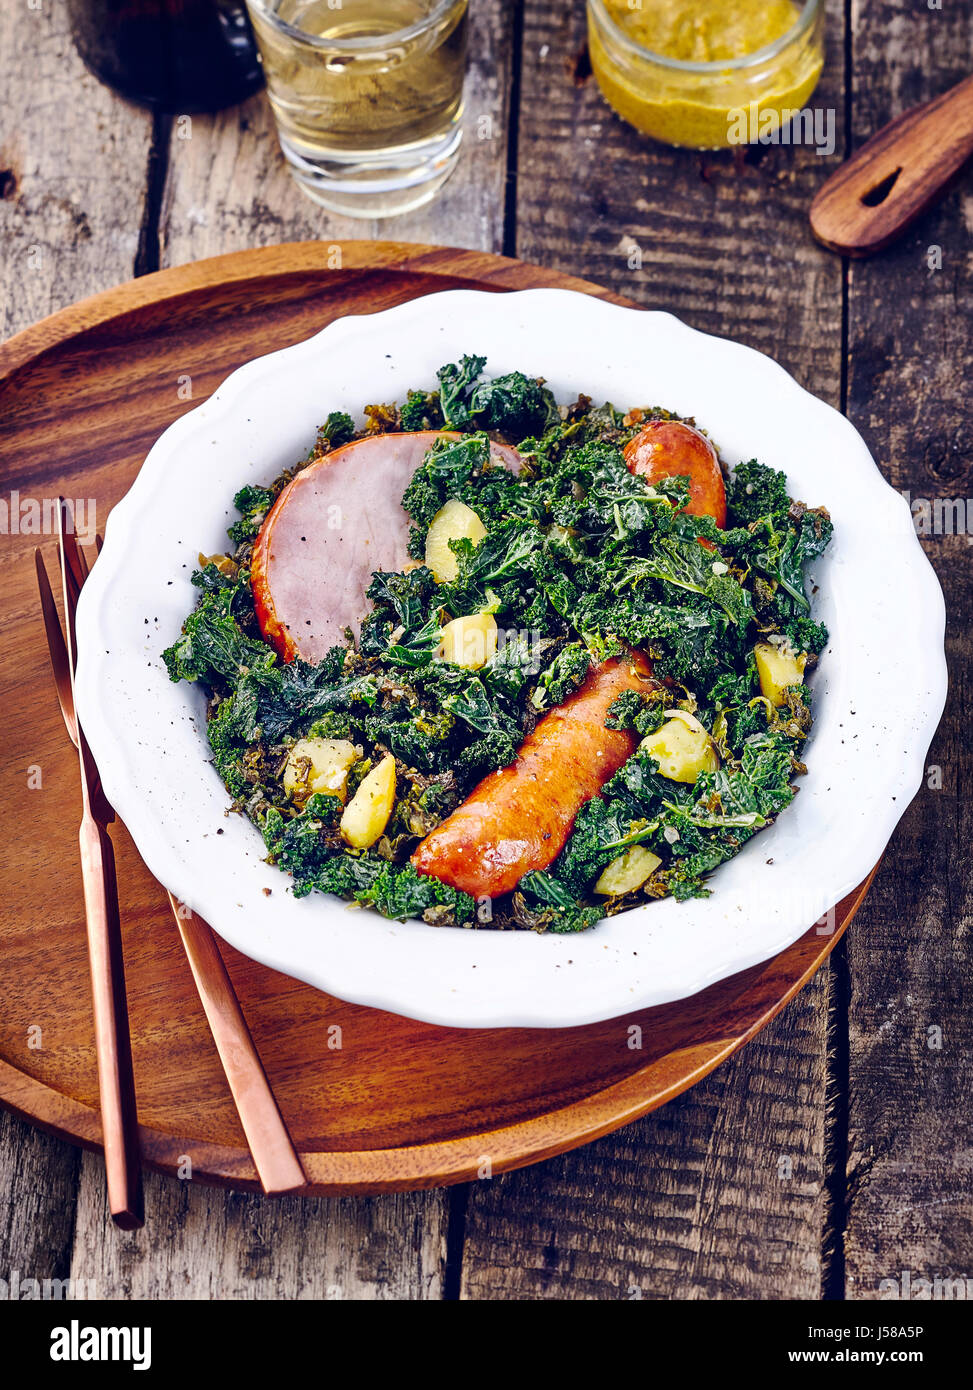 Kale with cabbage sausage and gammon steak Stock Photo